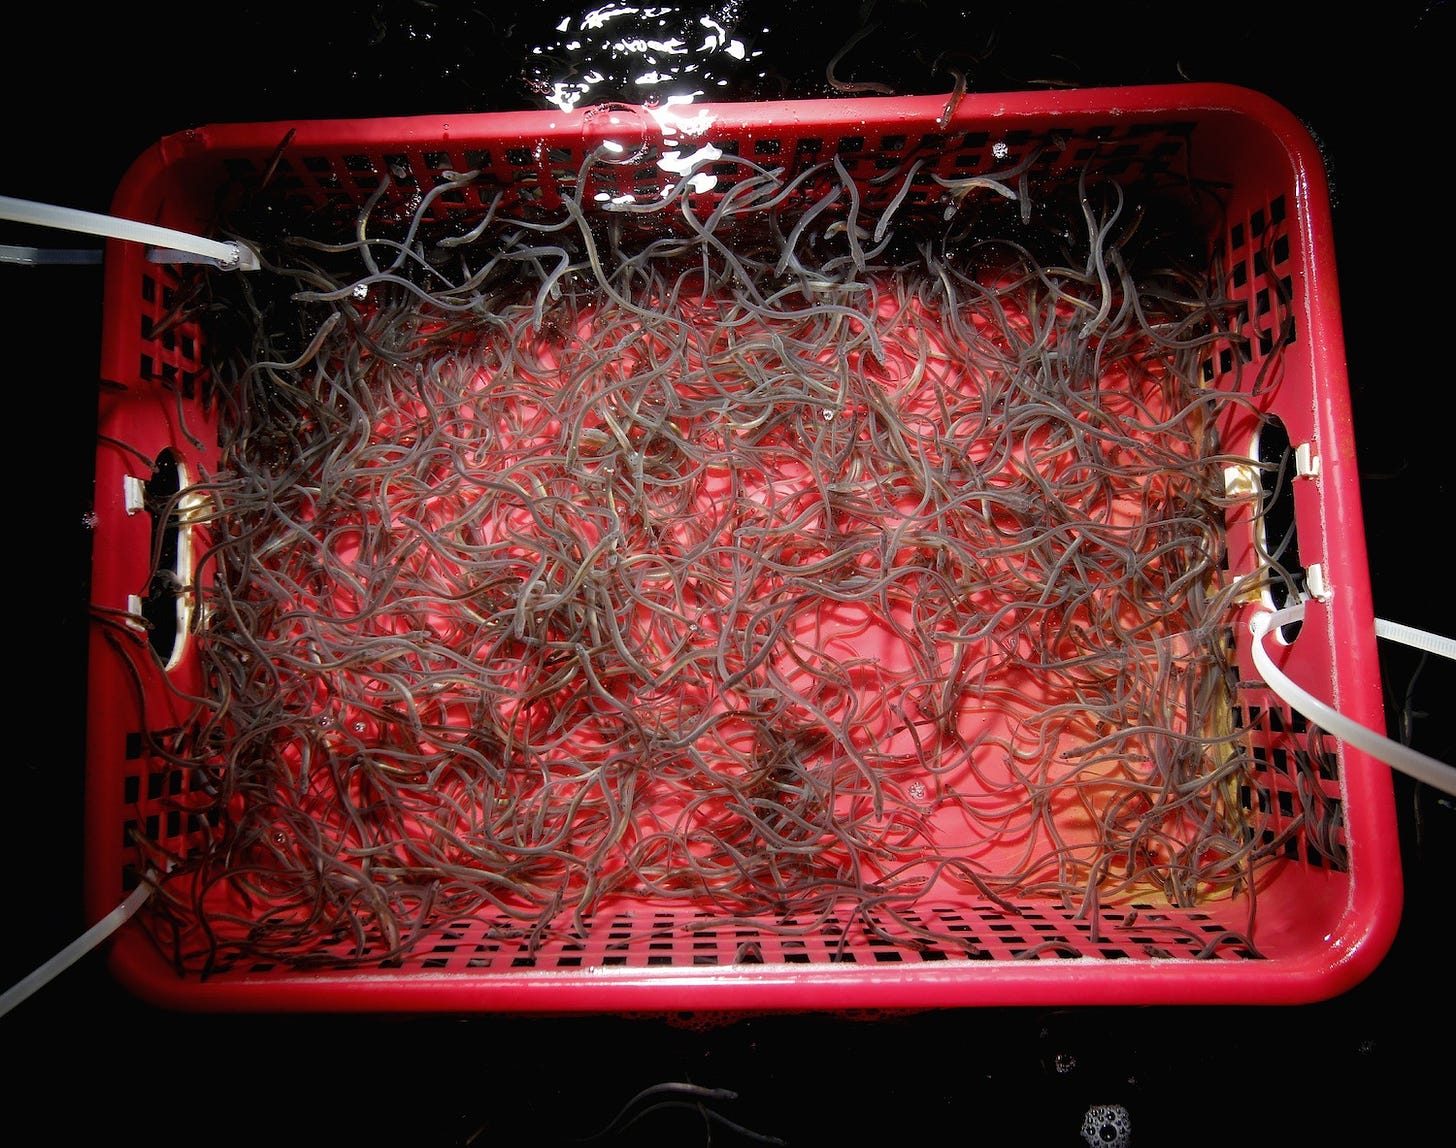 A picture of baby eels in a basket